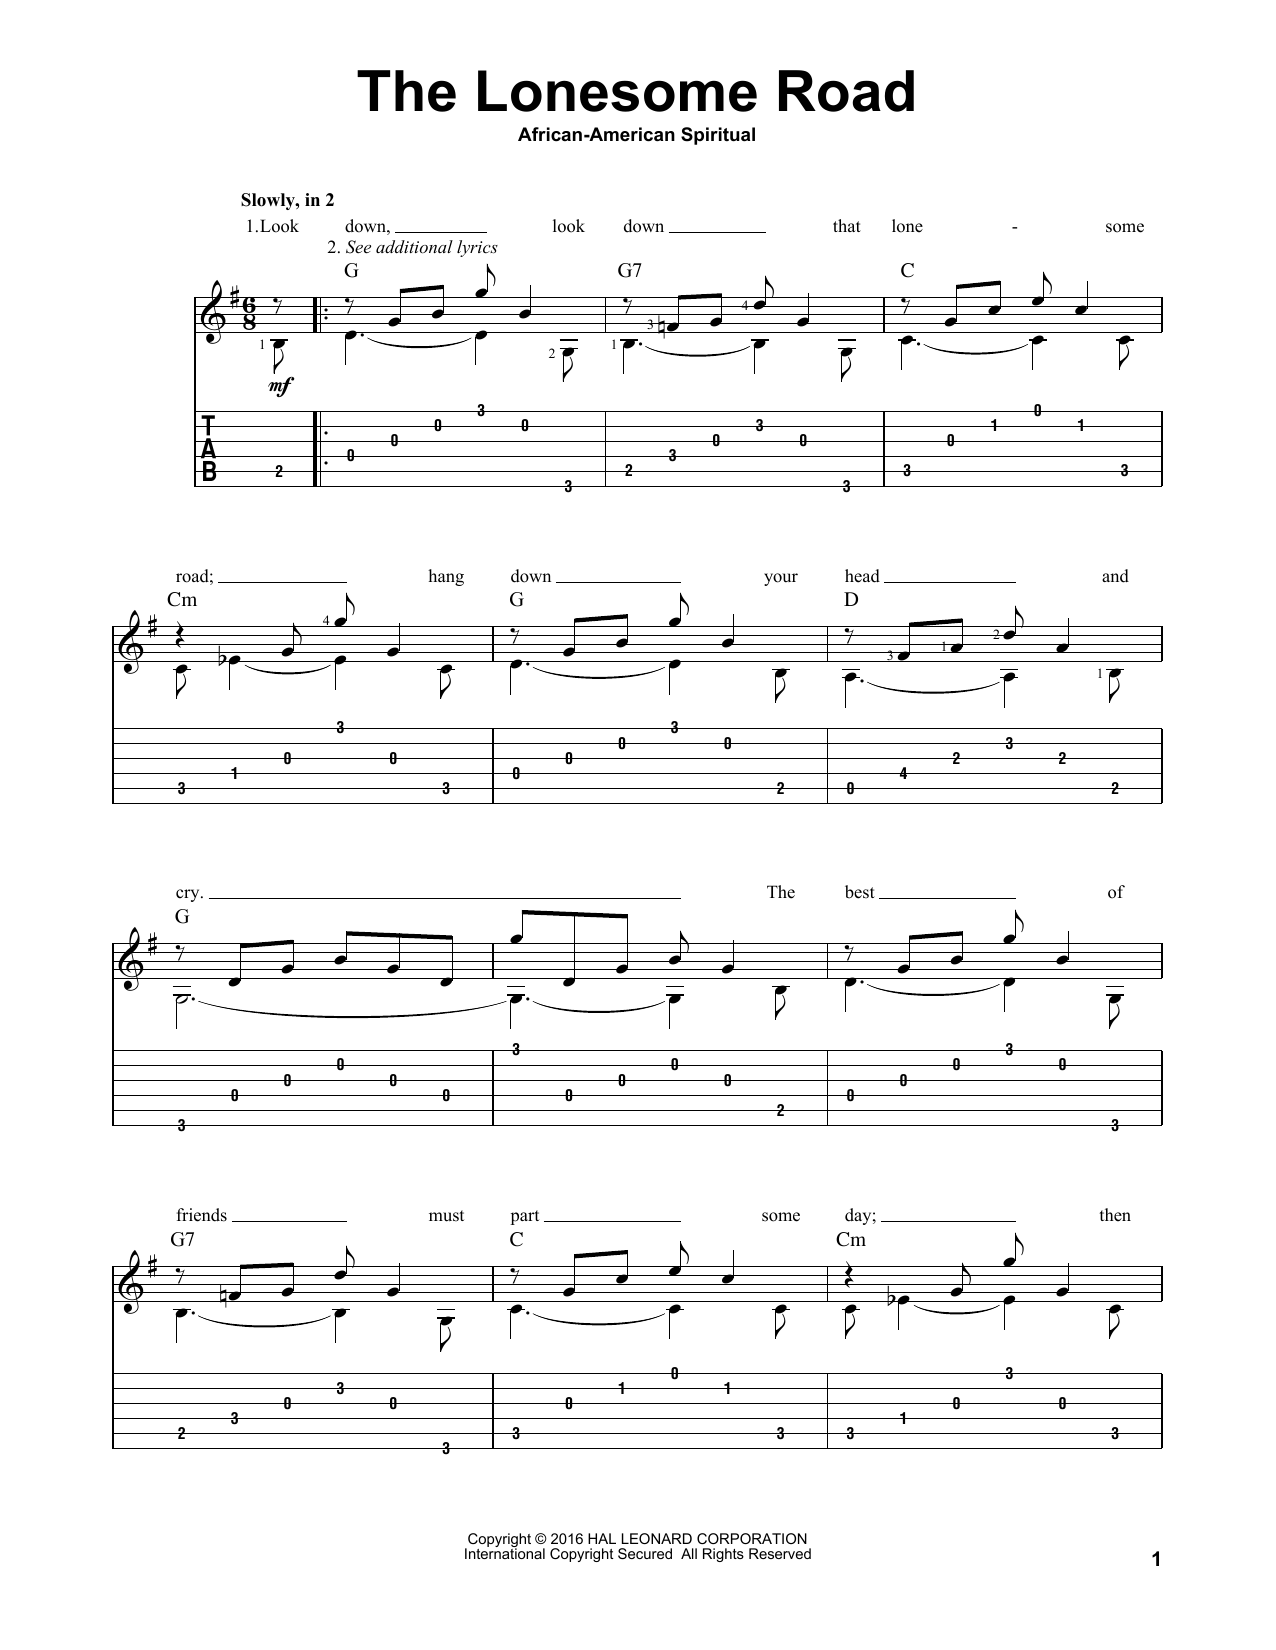 Download African-American Spiritual The Lonesome Road Sheet Music